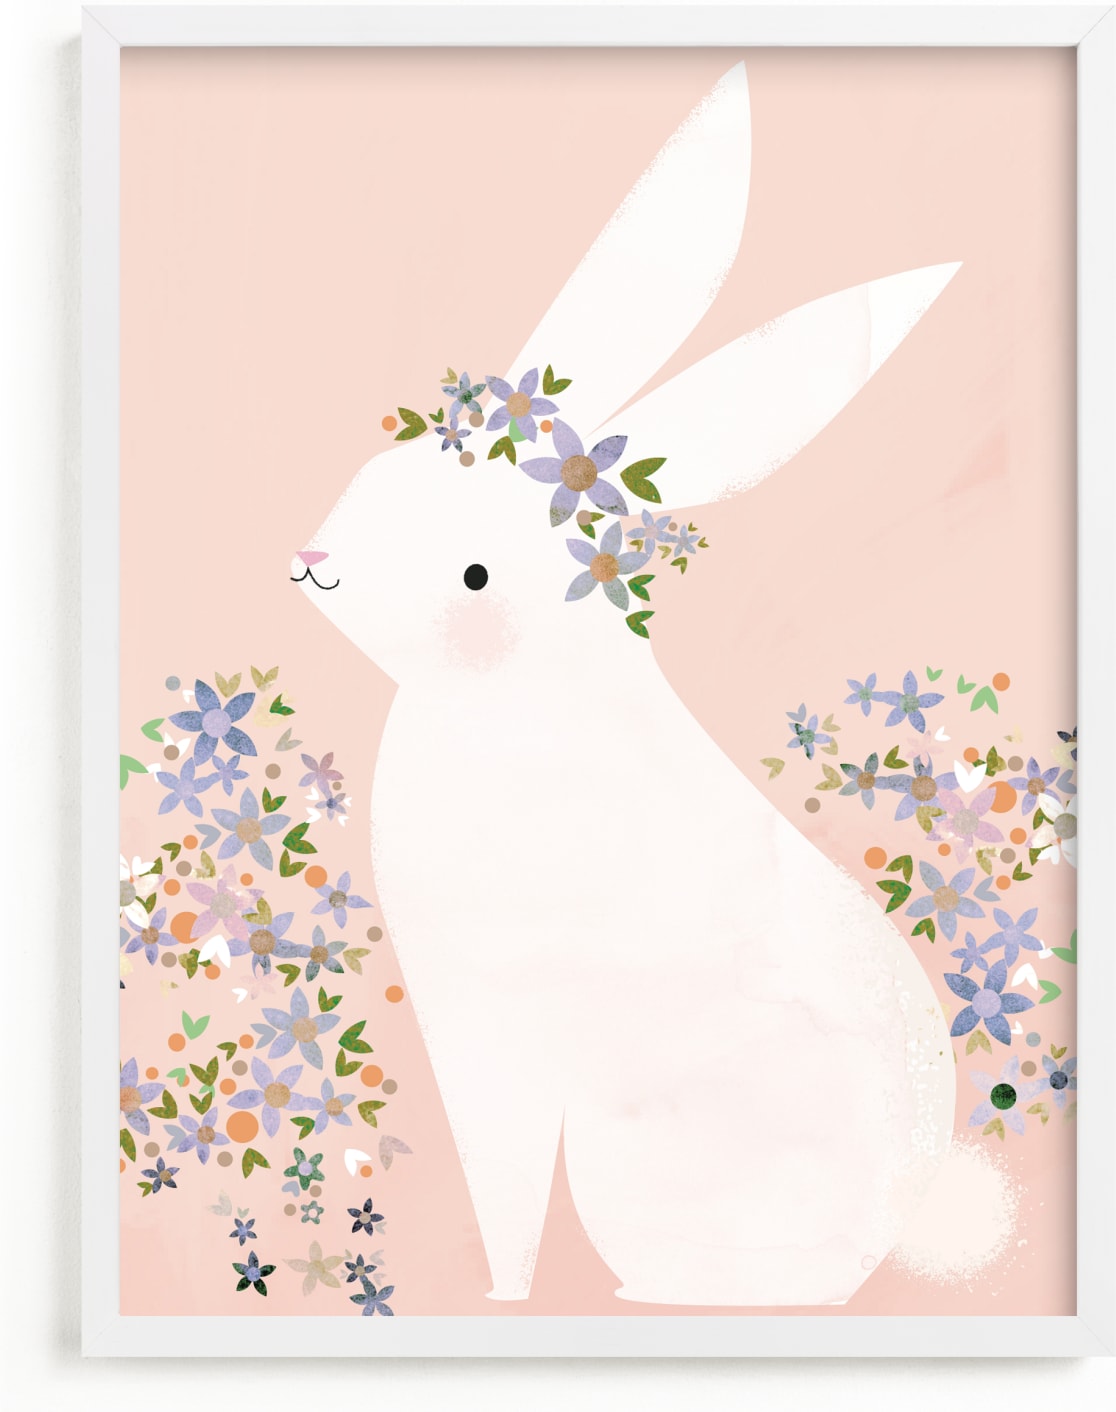 This is a colorful art by Lori Wemple called Bunny.